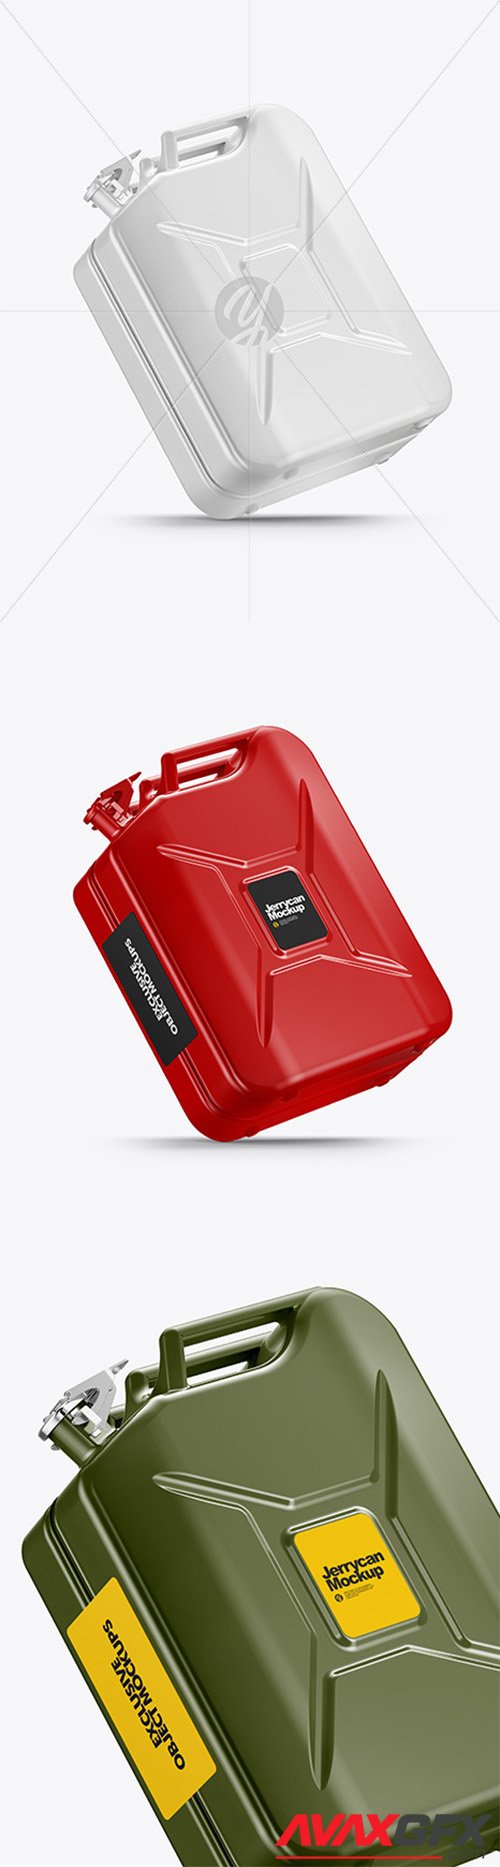 Fuel Jerrycan Mockup - Half Side View 80156